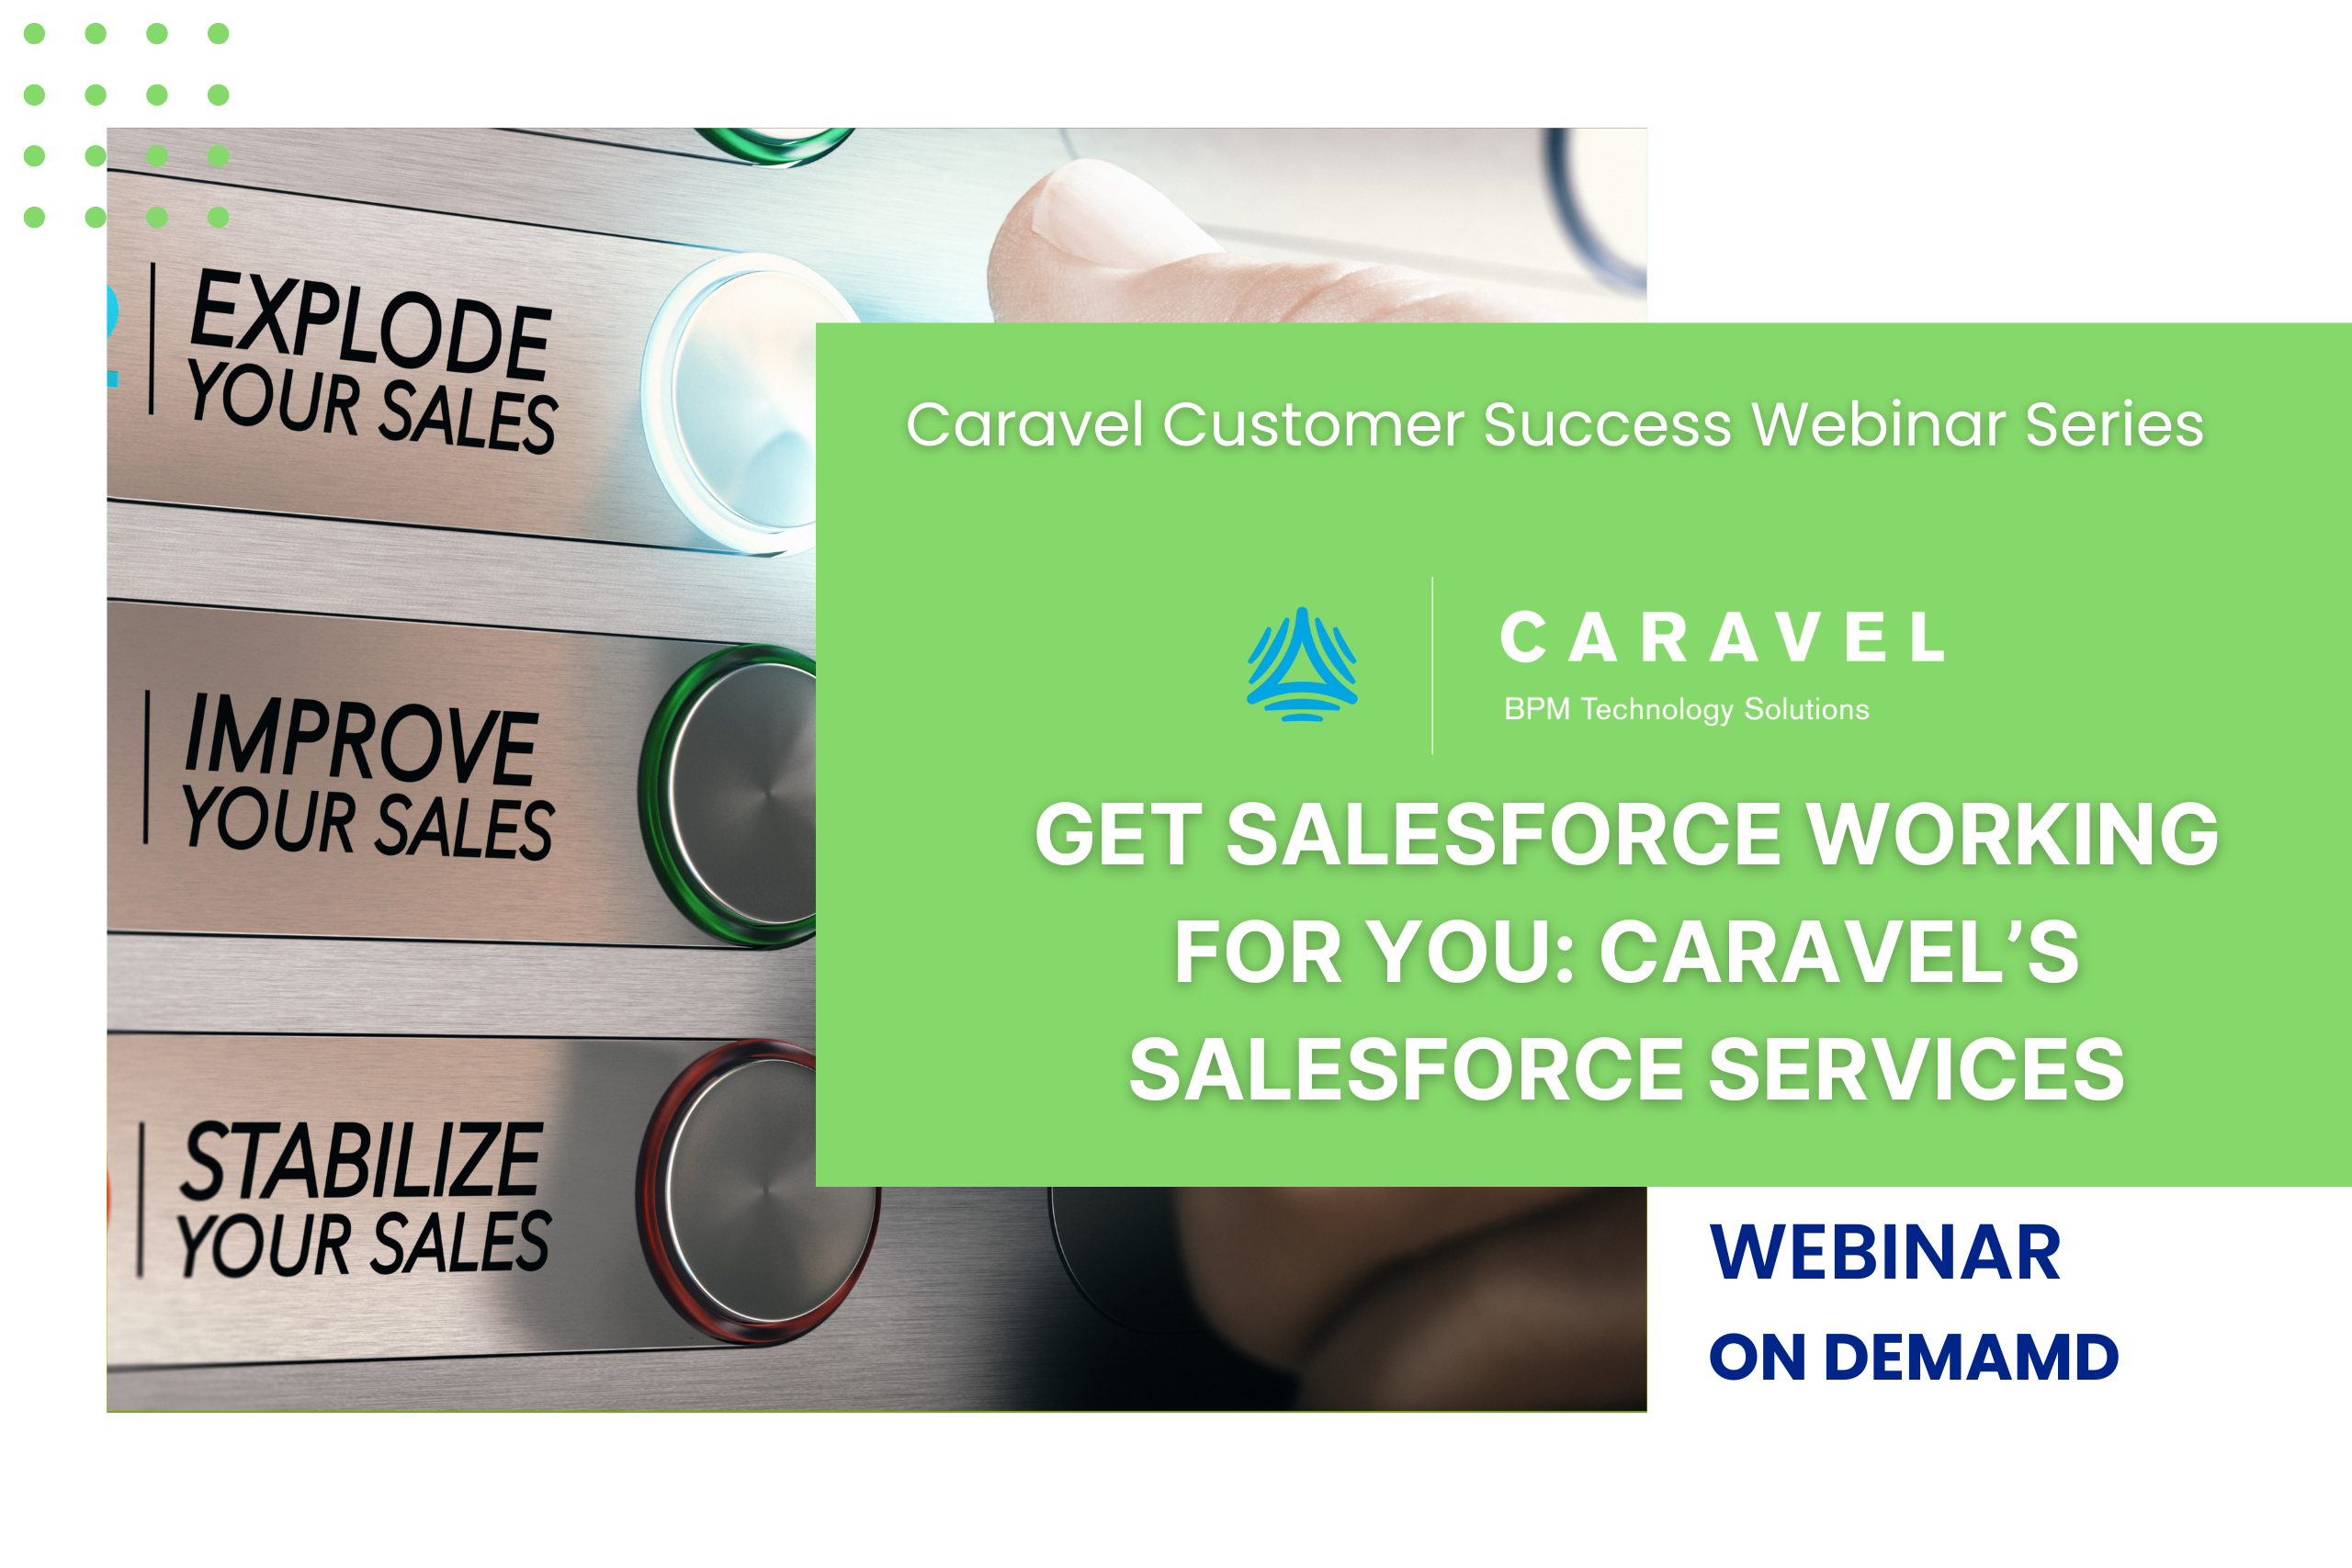 Get Salesforce Working for You: Caravel’s Salesforce Services